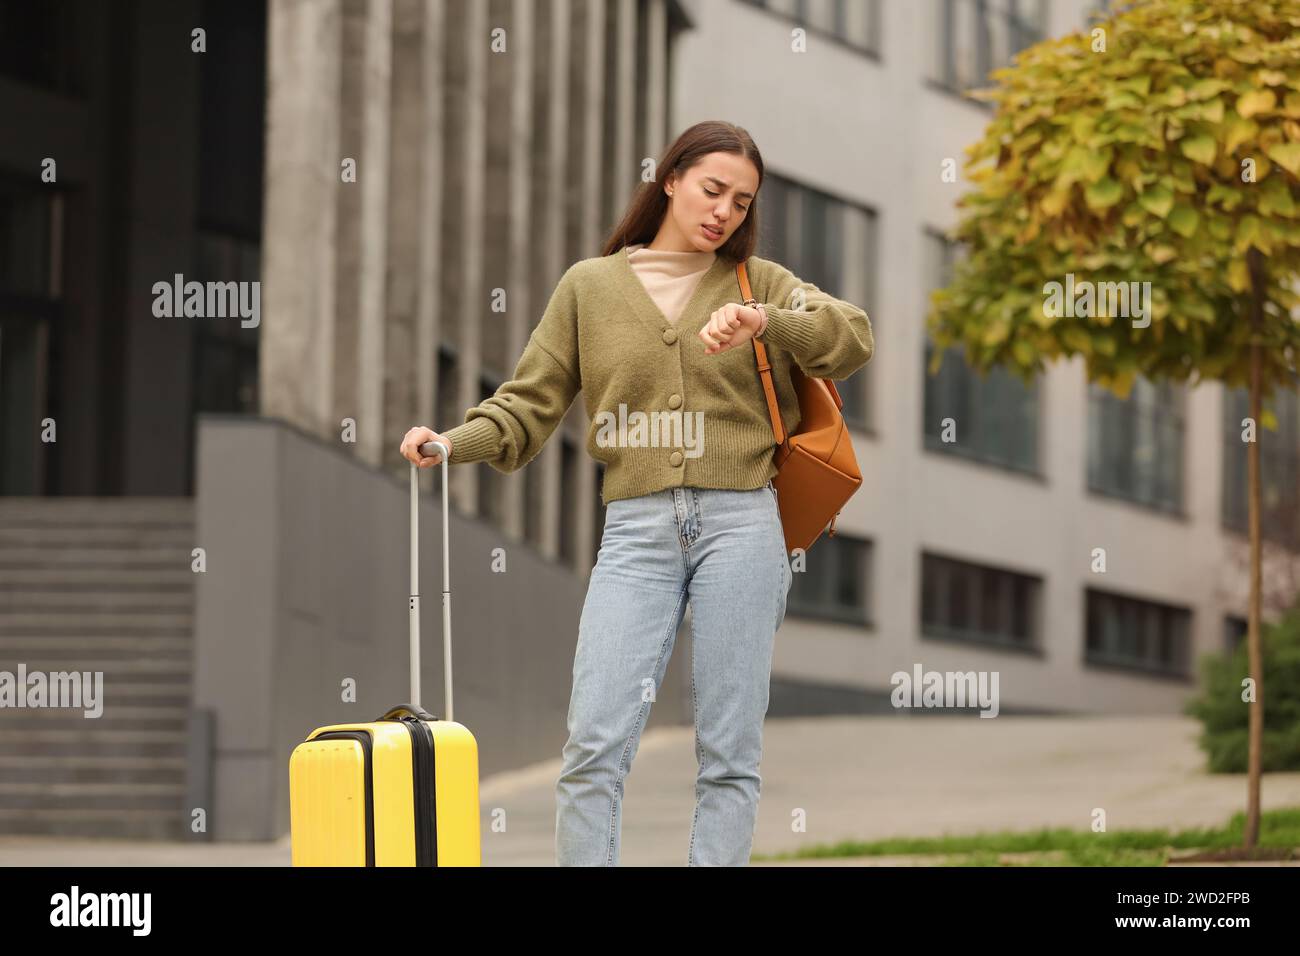 Being late. Worried woman with suitcase and backpack looking at watch outdoors Stock Photo